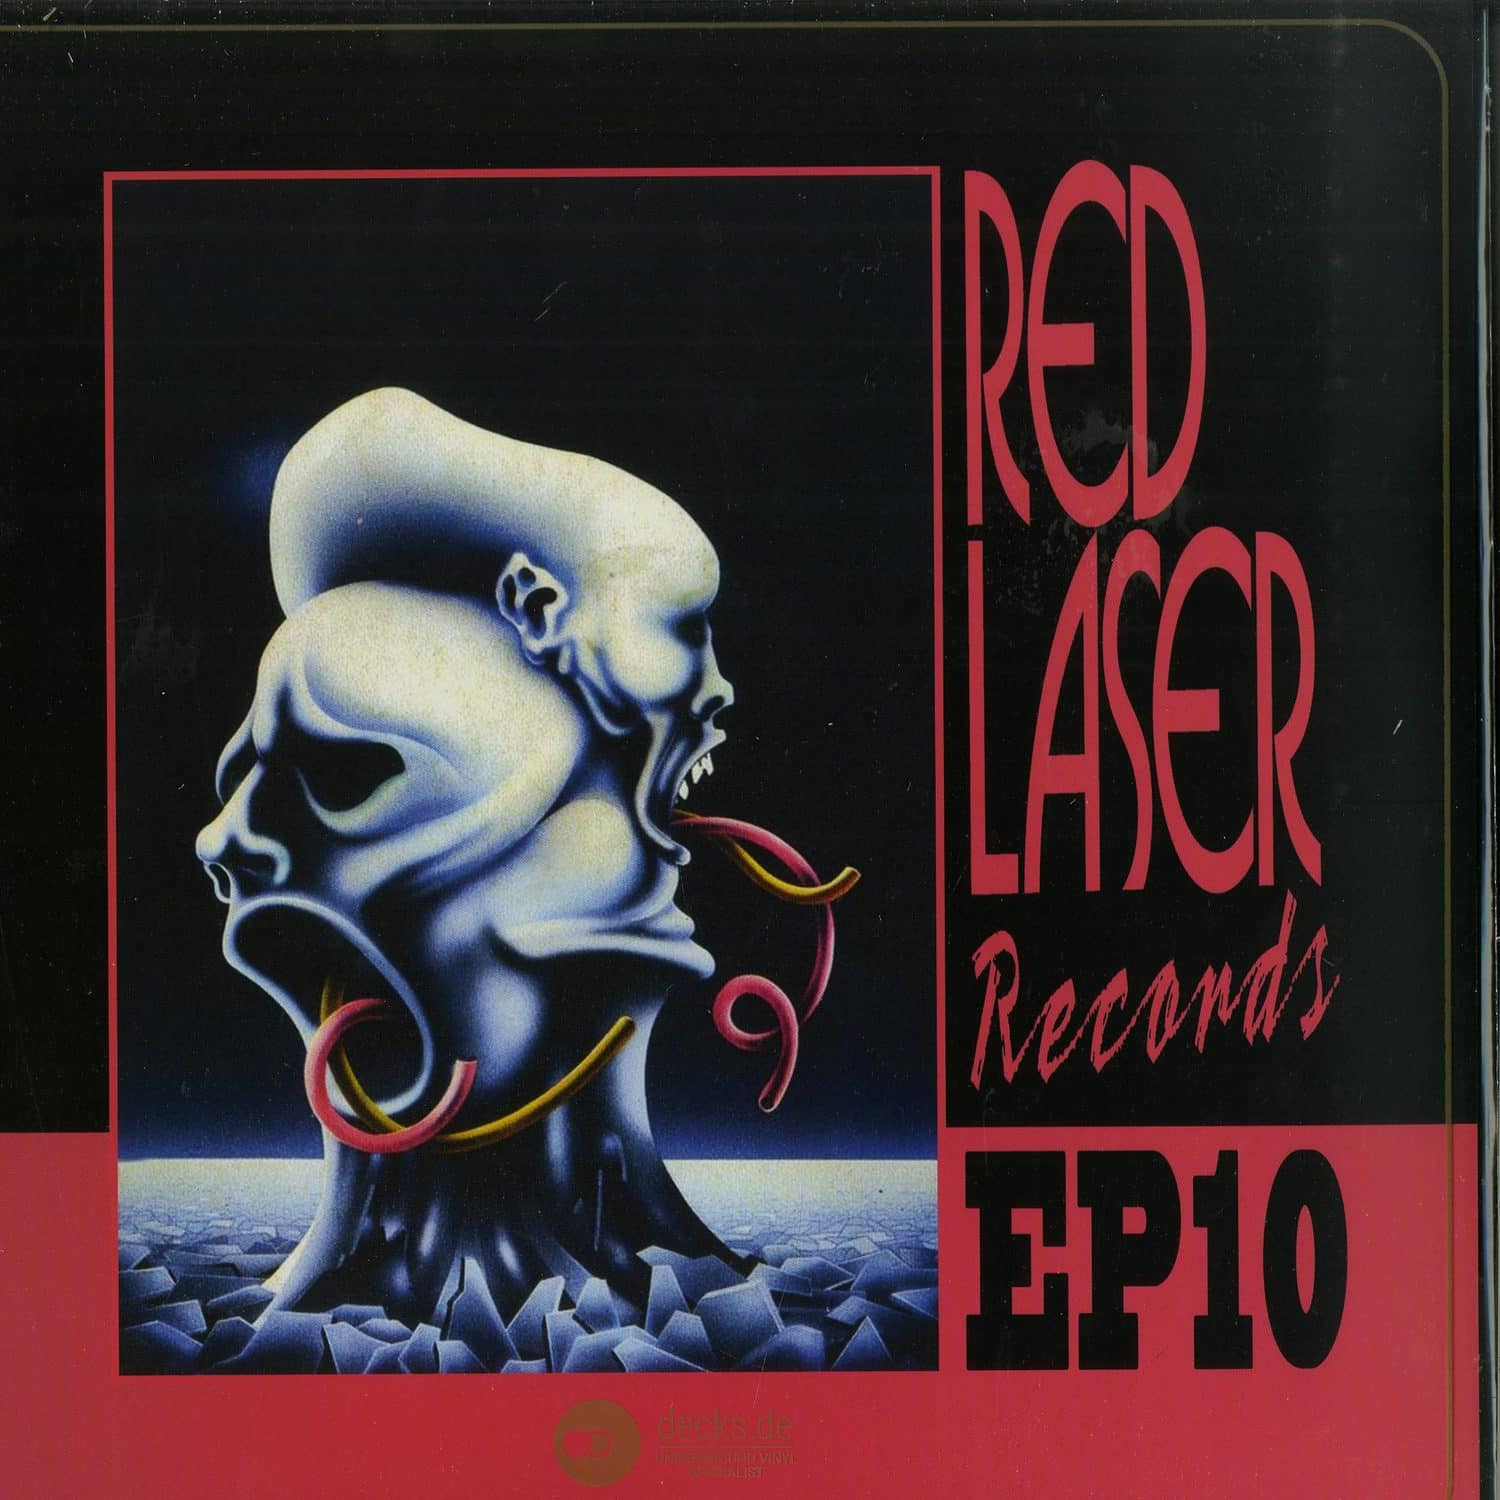 Various Artists - RED LASER RECORDS EP 10